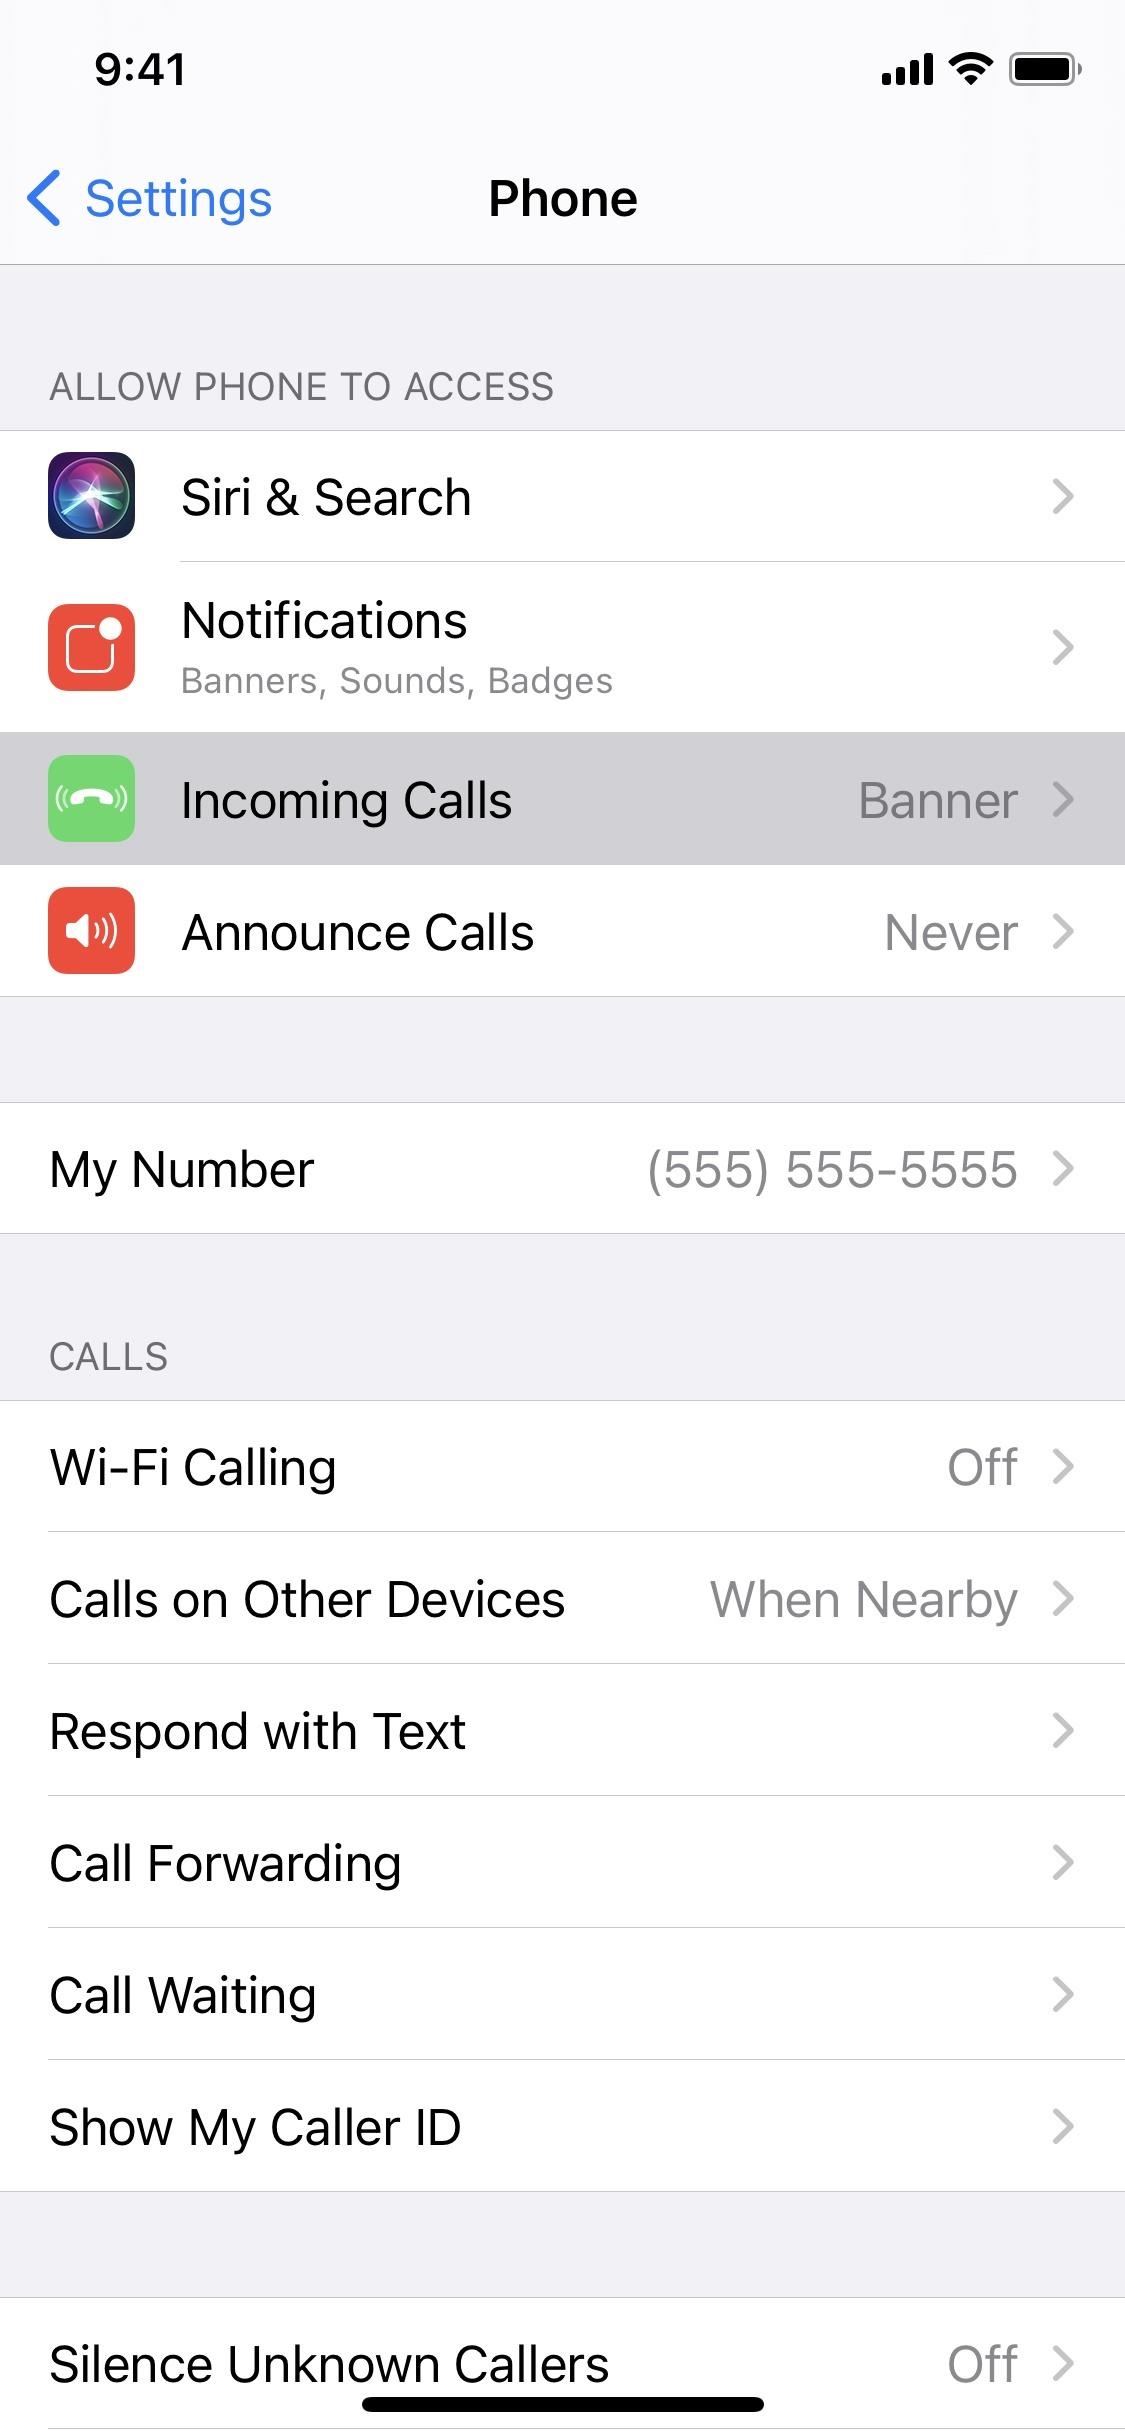 How to Bring Back Full-Screen Incoming Call Alerts for FaceTime, Phone & Other Calling Apps in iOS 14